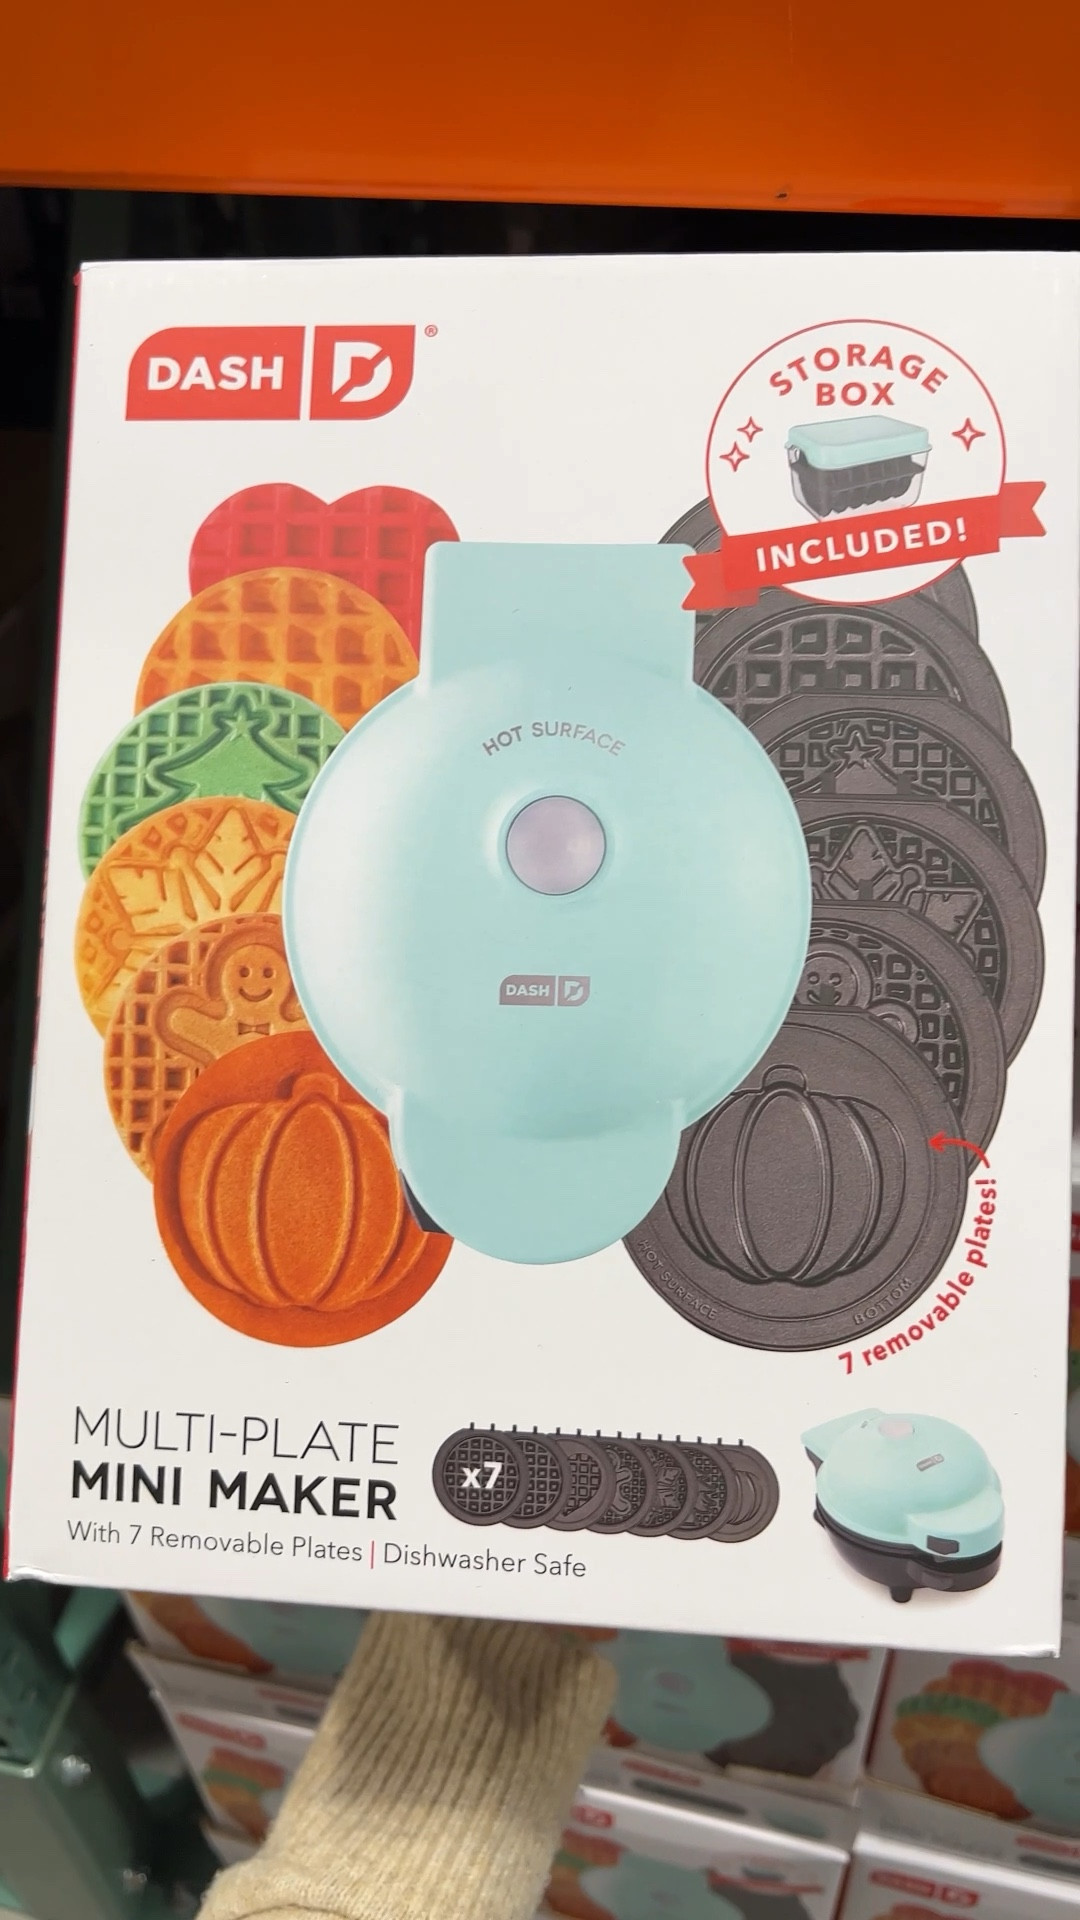 Multi-Plate Mini Maker with Removable Plates and Storage Case